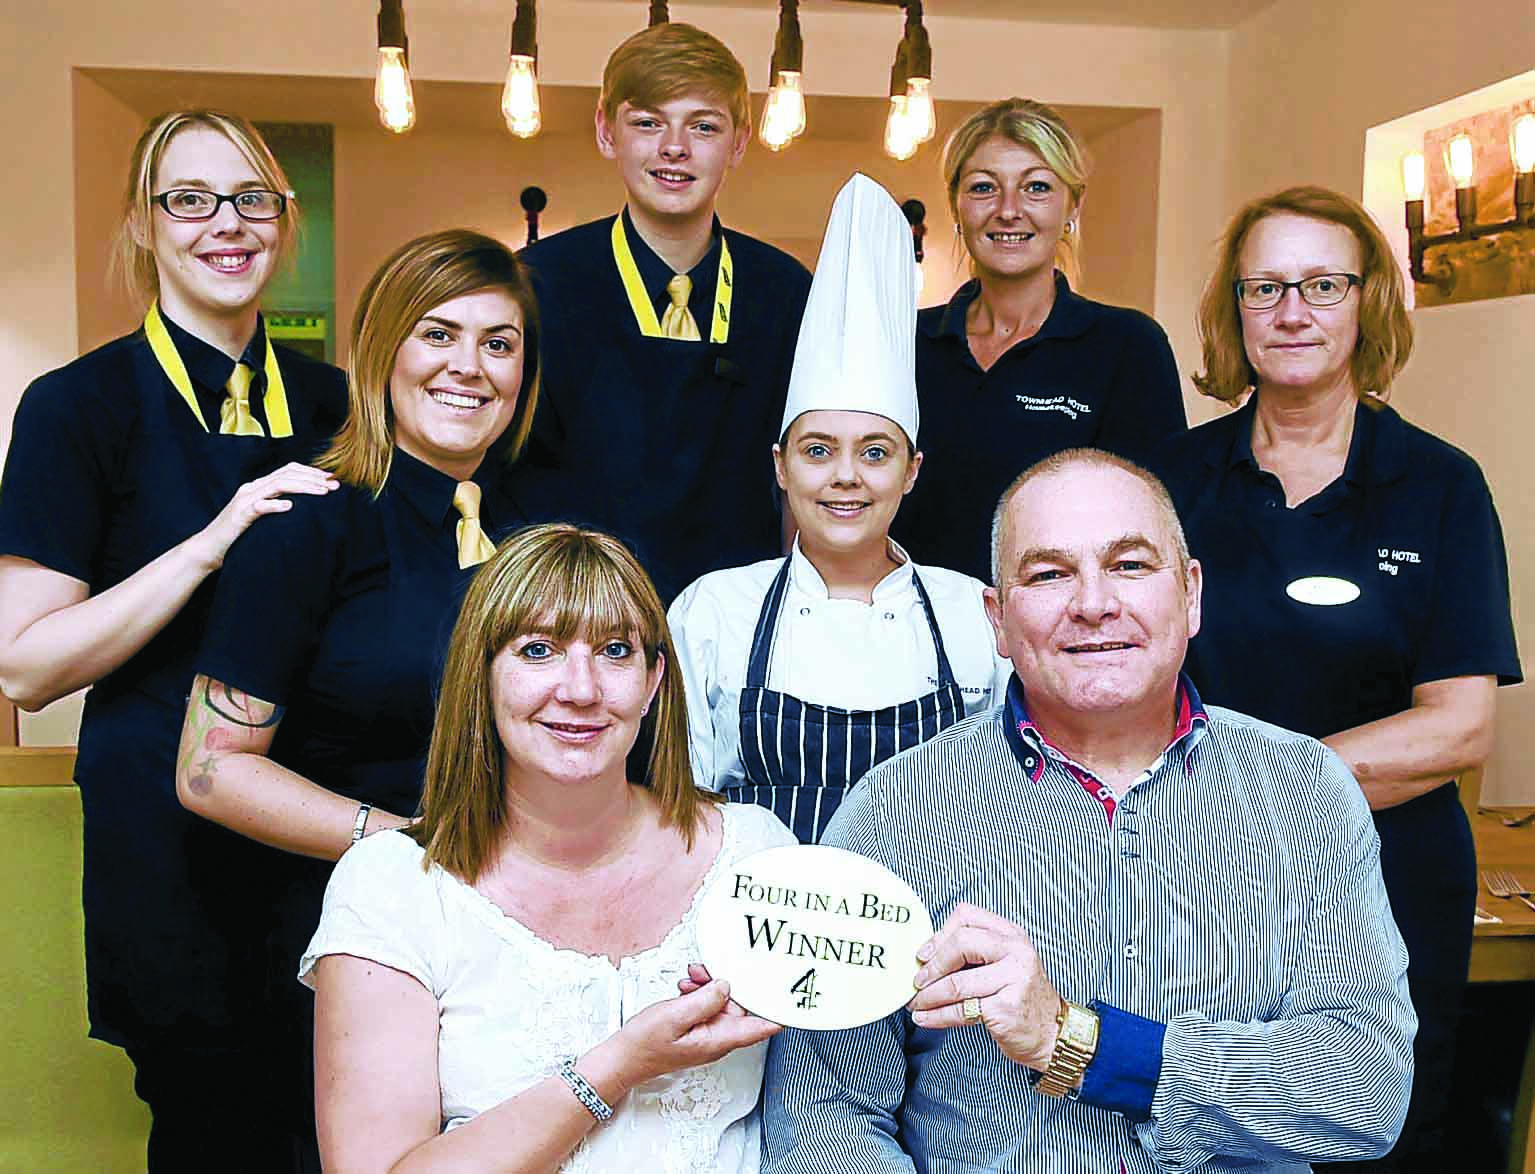 Hotel’s TV win puts town on the map